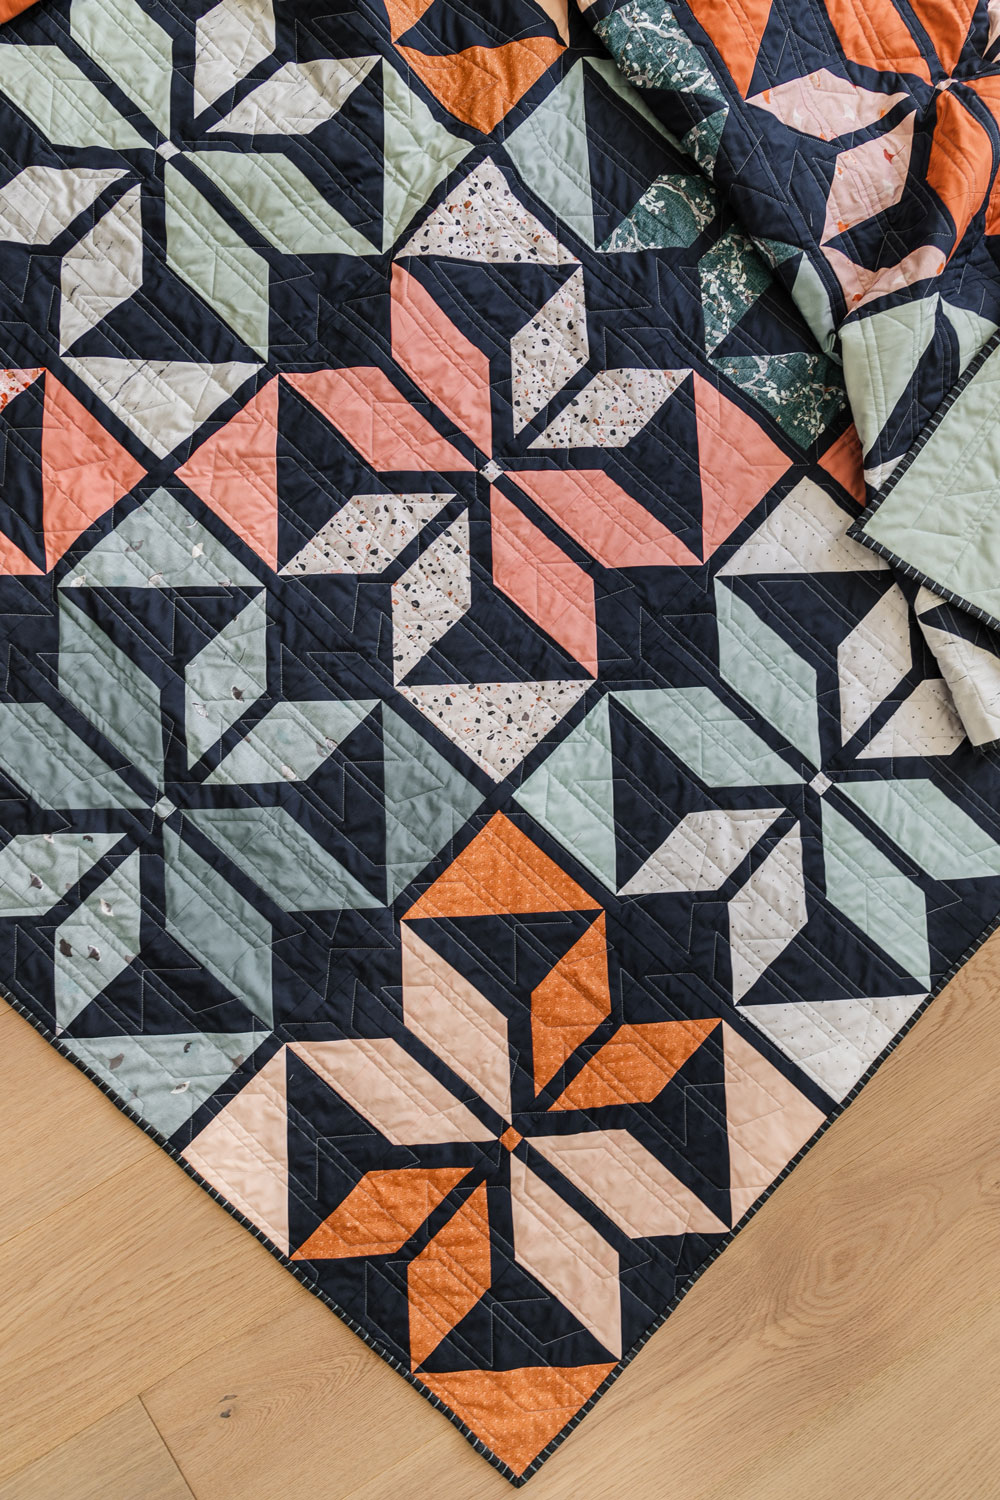 Week 6 is the final week of the Holiday Party quilt sew along! This week we assemble the quilt blocks and finish the top. suzyquilts.com #quiltalong #modernquilt